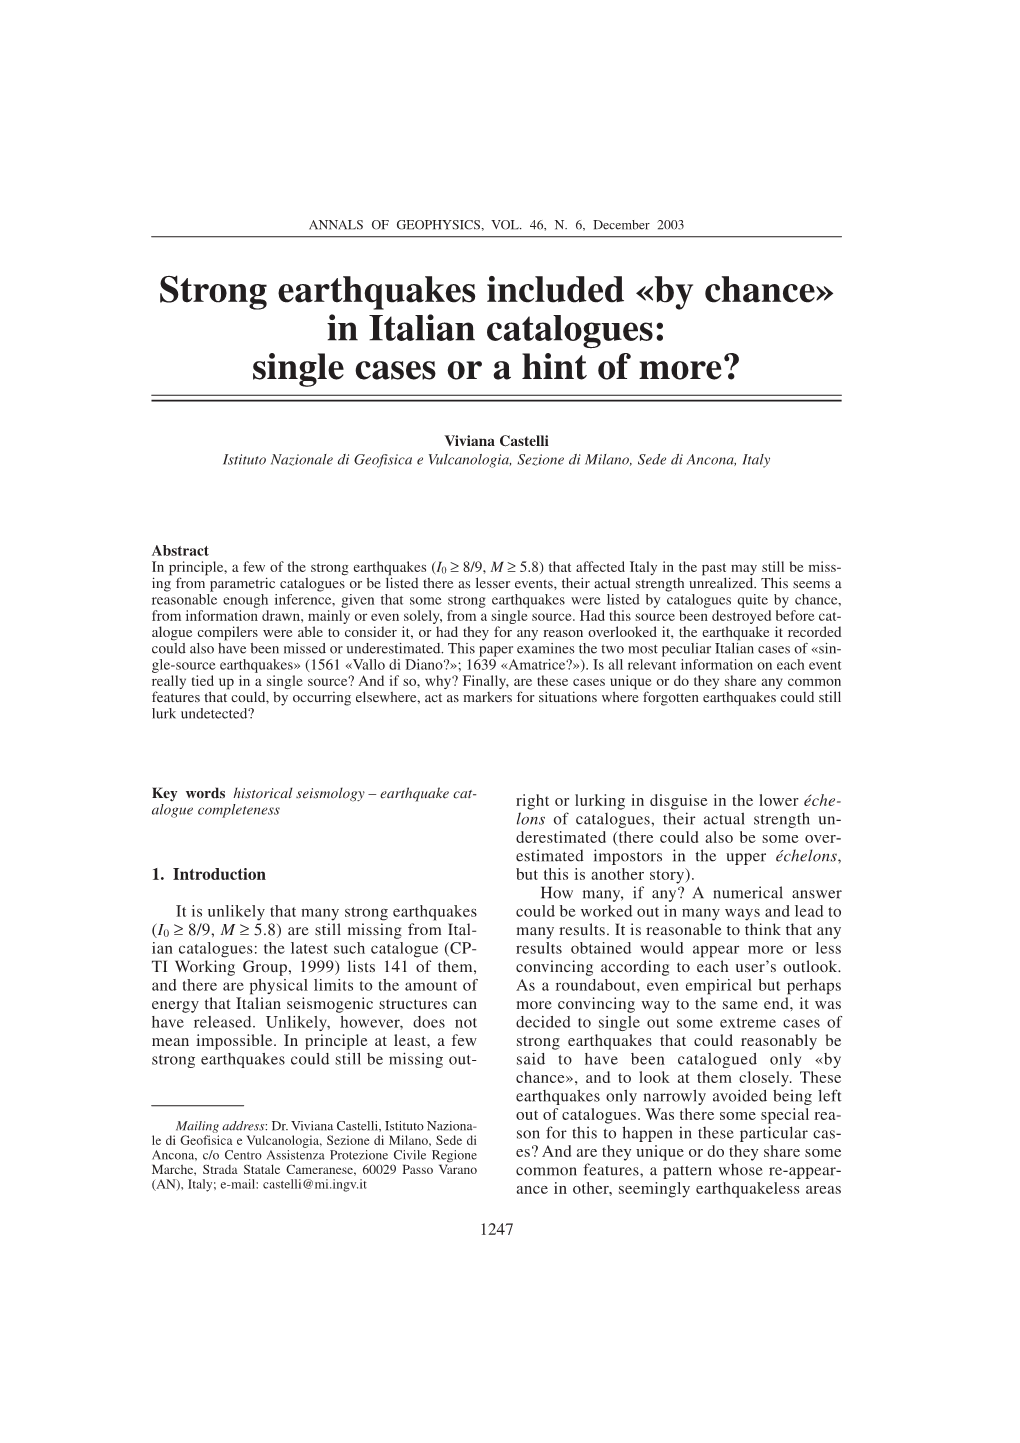 Strong Earthquakes Included «By Chance» in Italian Catalogues: Single Cases Or a Hint of More?